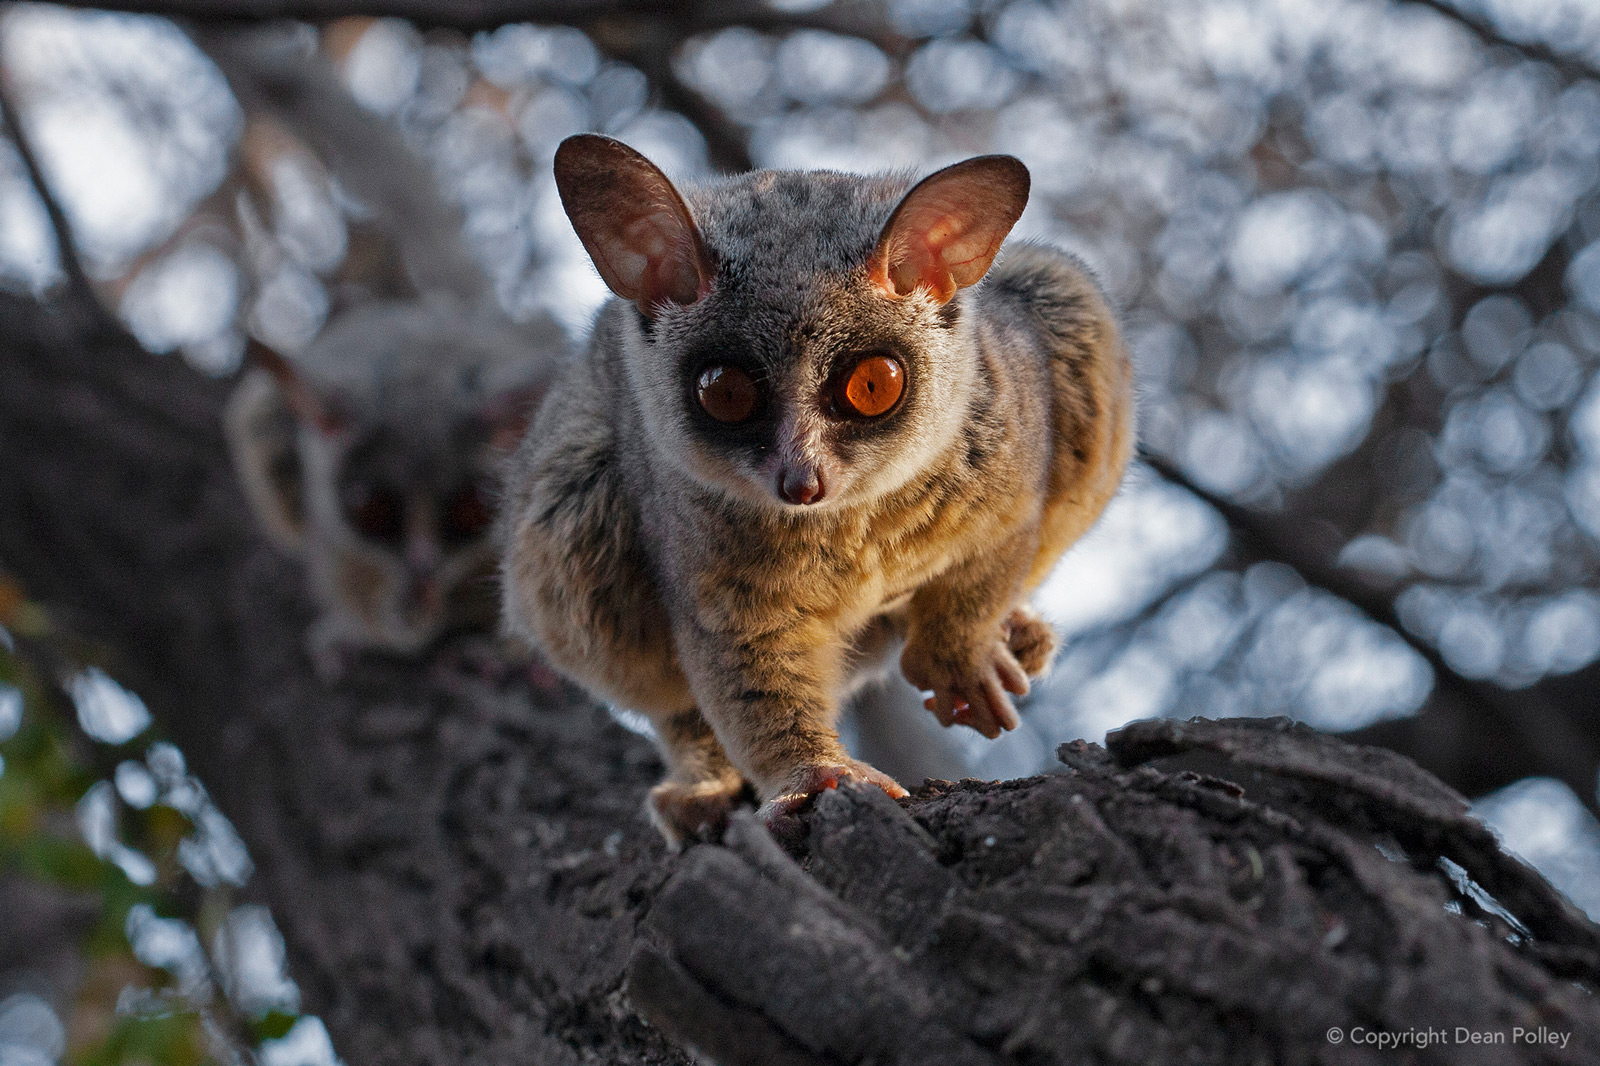 Dean Polley Lesser Bushbaby Lesser Galago Wiping Urine Laying Scent Trail Buffesldrift Game Nature Reserve Rsa Africa Geographic